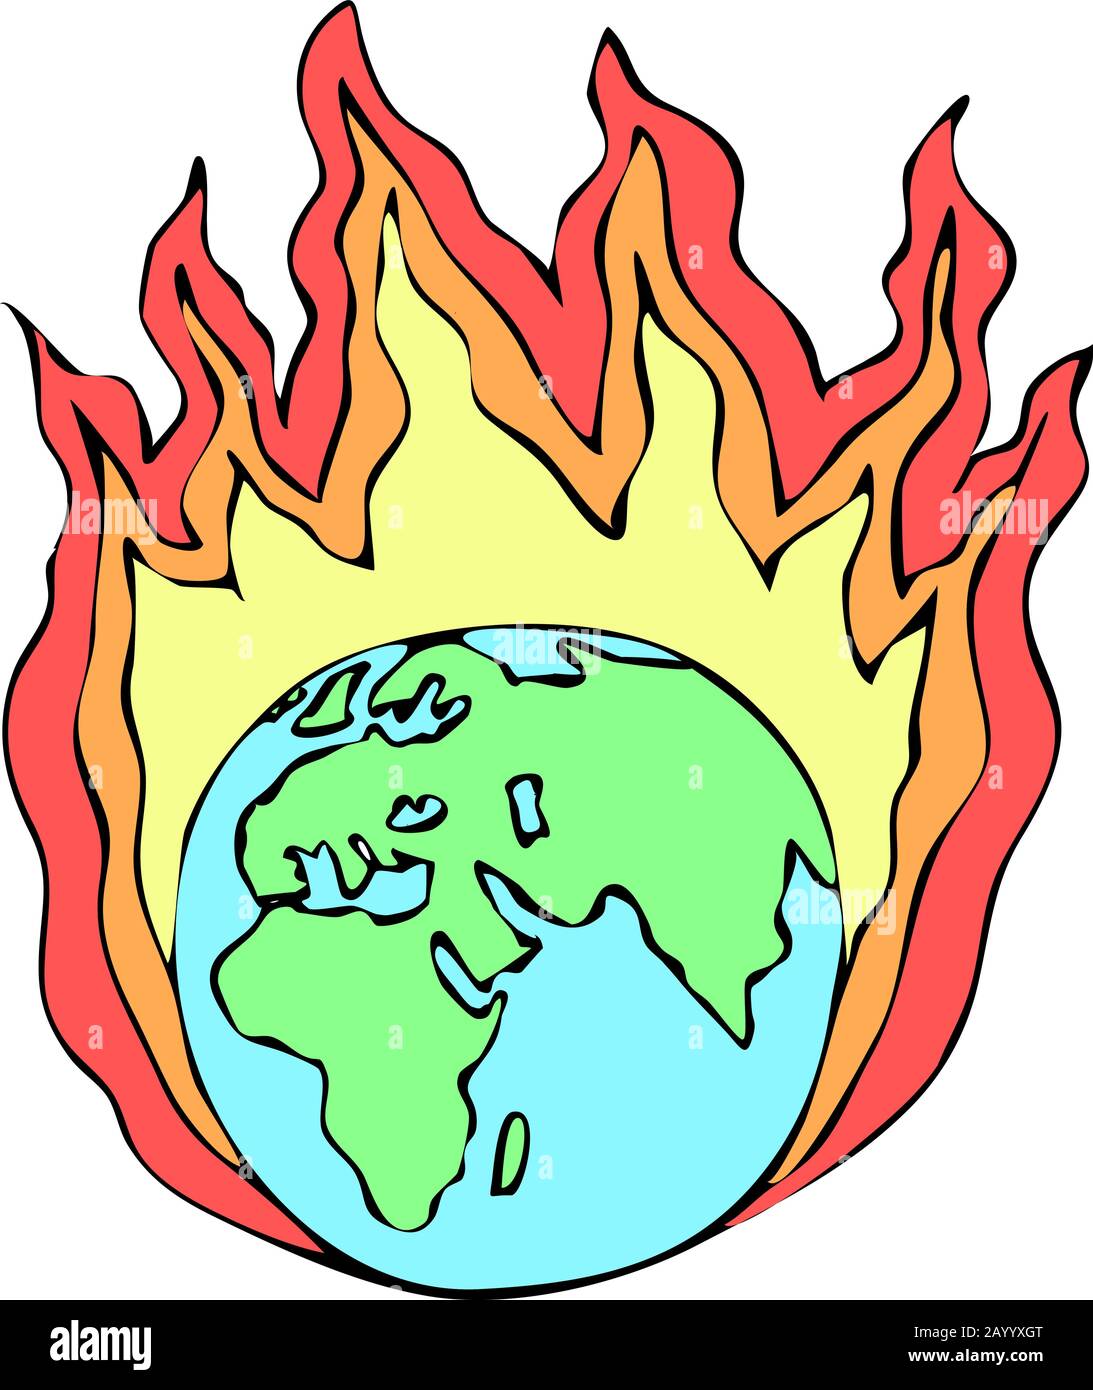 The Earth on fire vector illustration for climate change/global